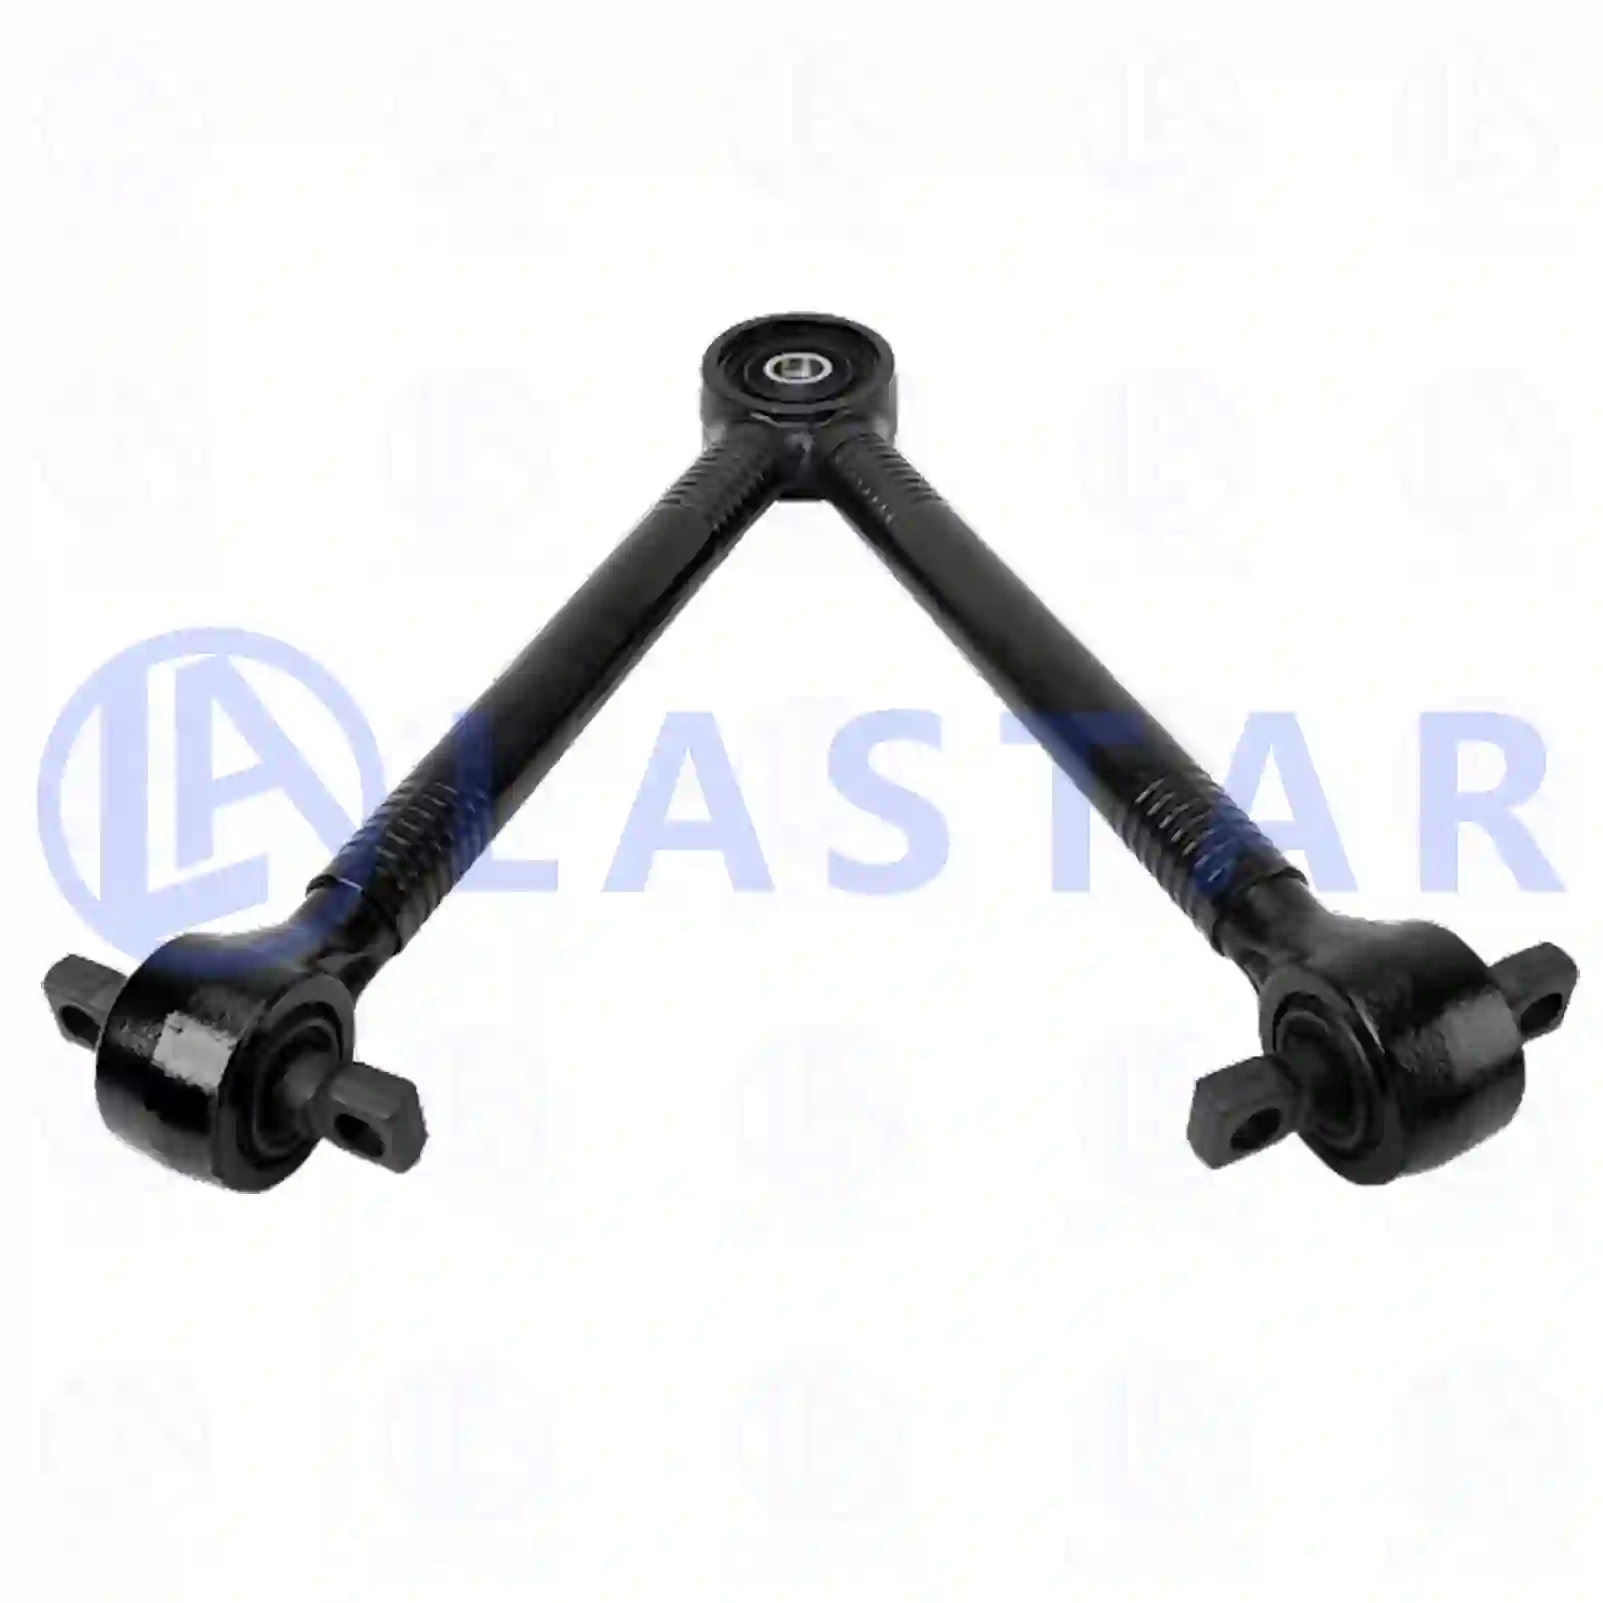 V-stay, 77727566, 3935505405, 6533500205, 6583500205 ||  77727566 Lastar Spare Part | Truck Spare Parts, Auotomotive Spare Parts V-stay, 77727566, 3935505405, 6533500205, 6583500205 ||  77727566 Lastar Spare Part | Truck Spare Parts, Auotomotive Spare Parts